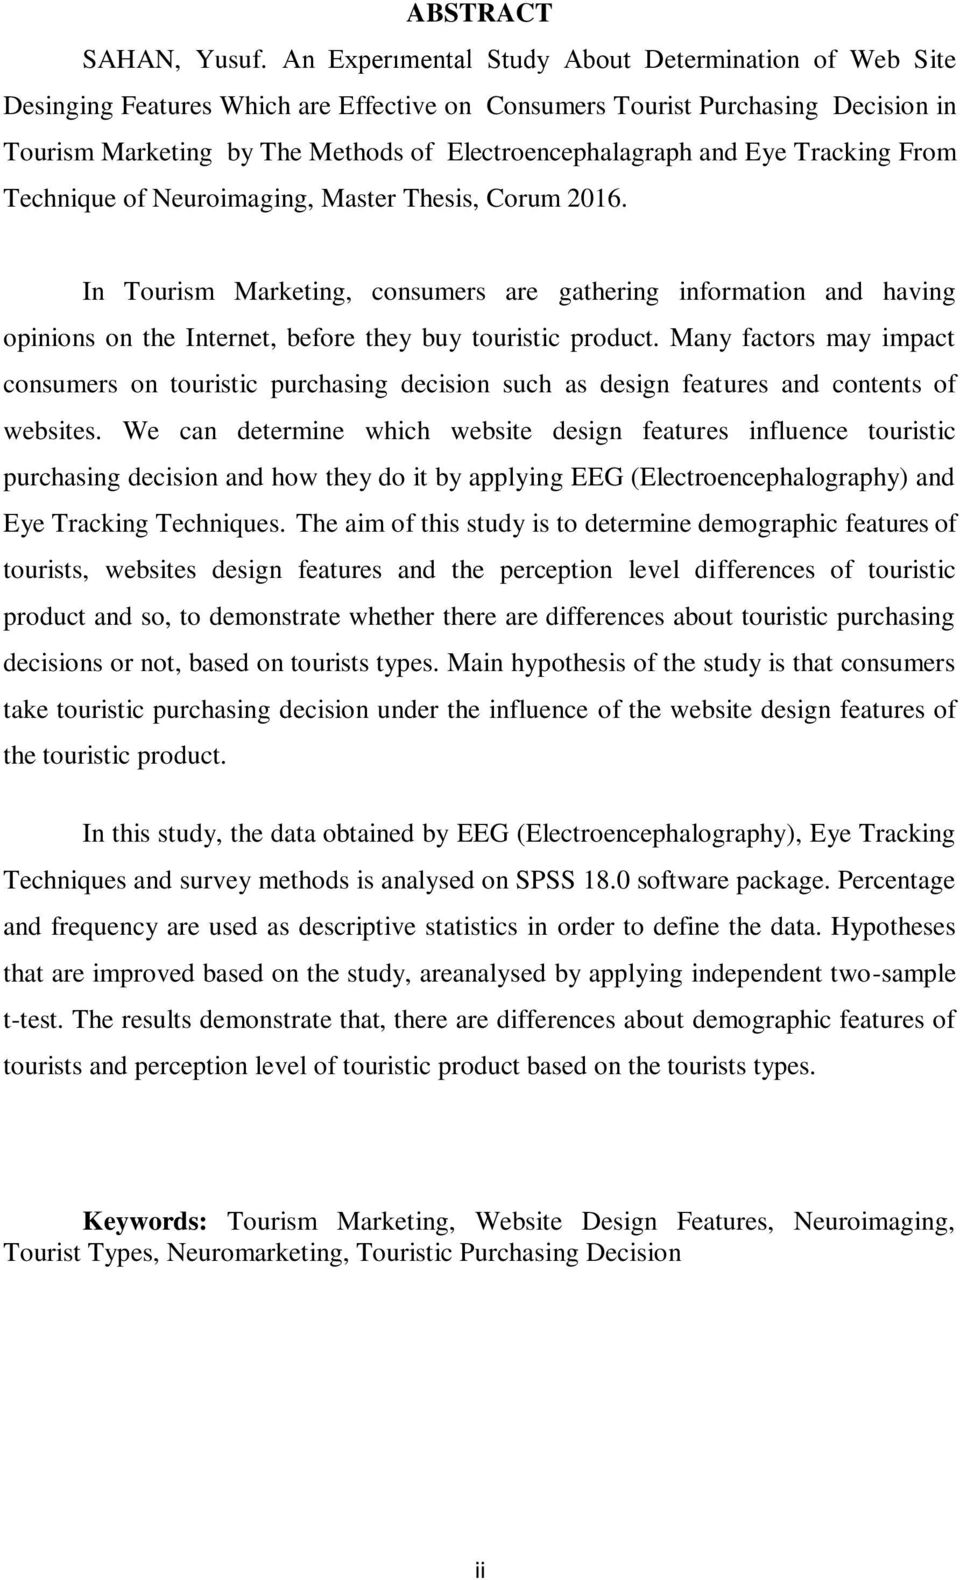 Eye Tracking From Technique of Neuroimaging, Master Thesis, Corum 2016.